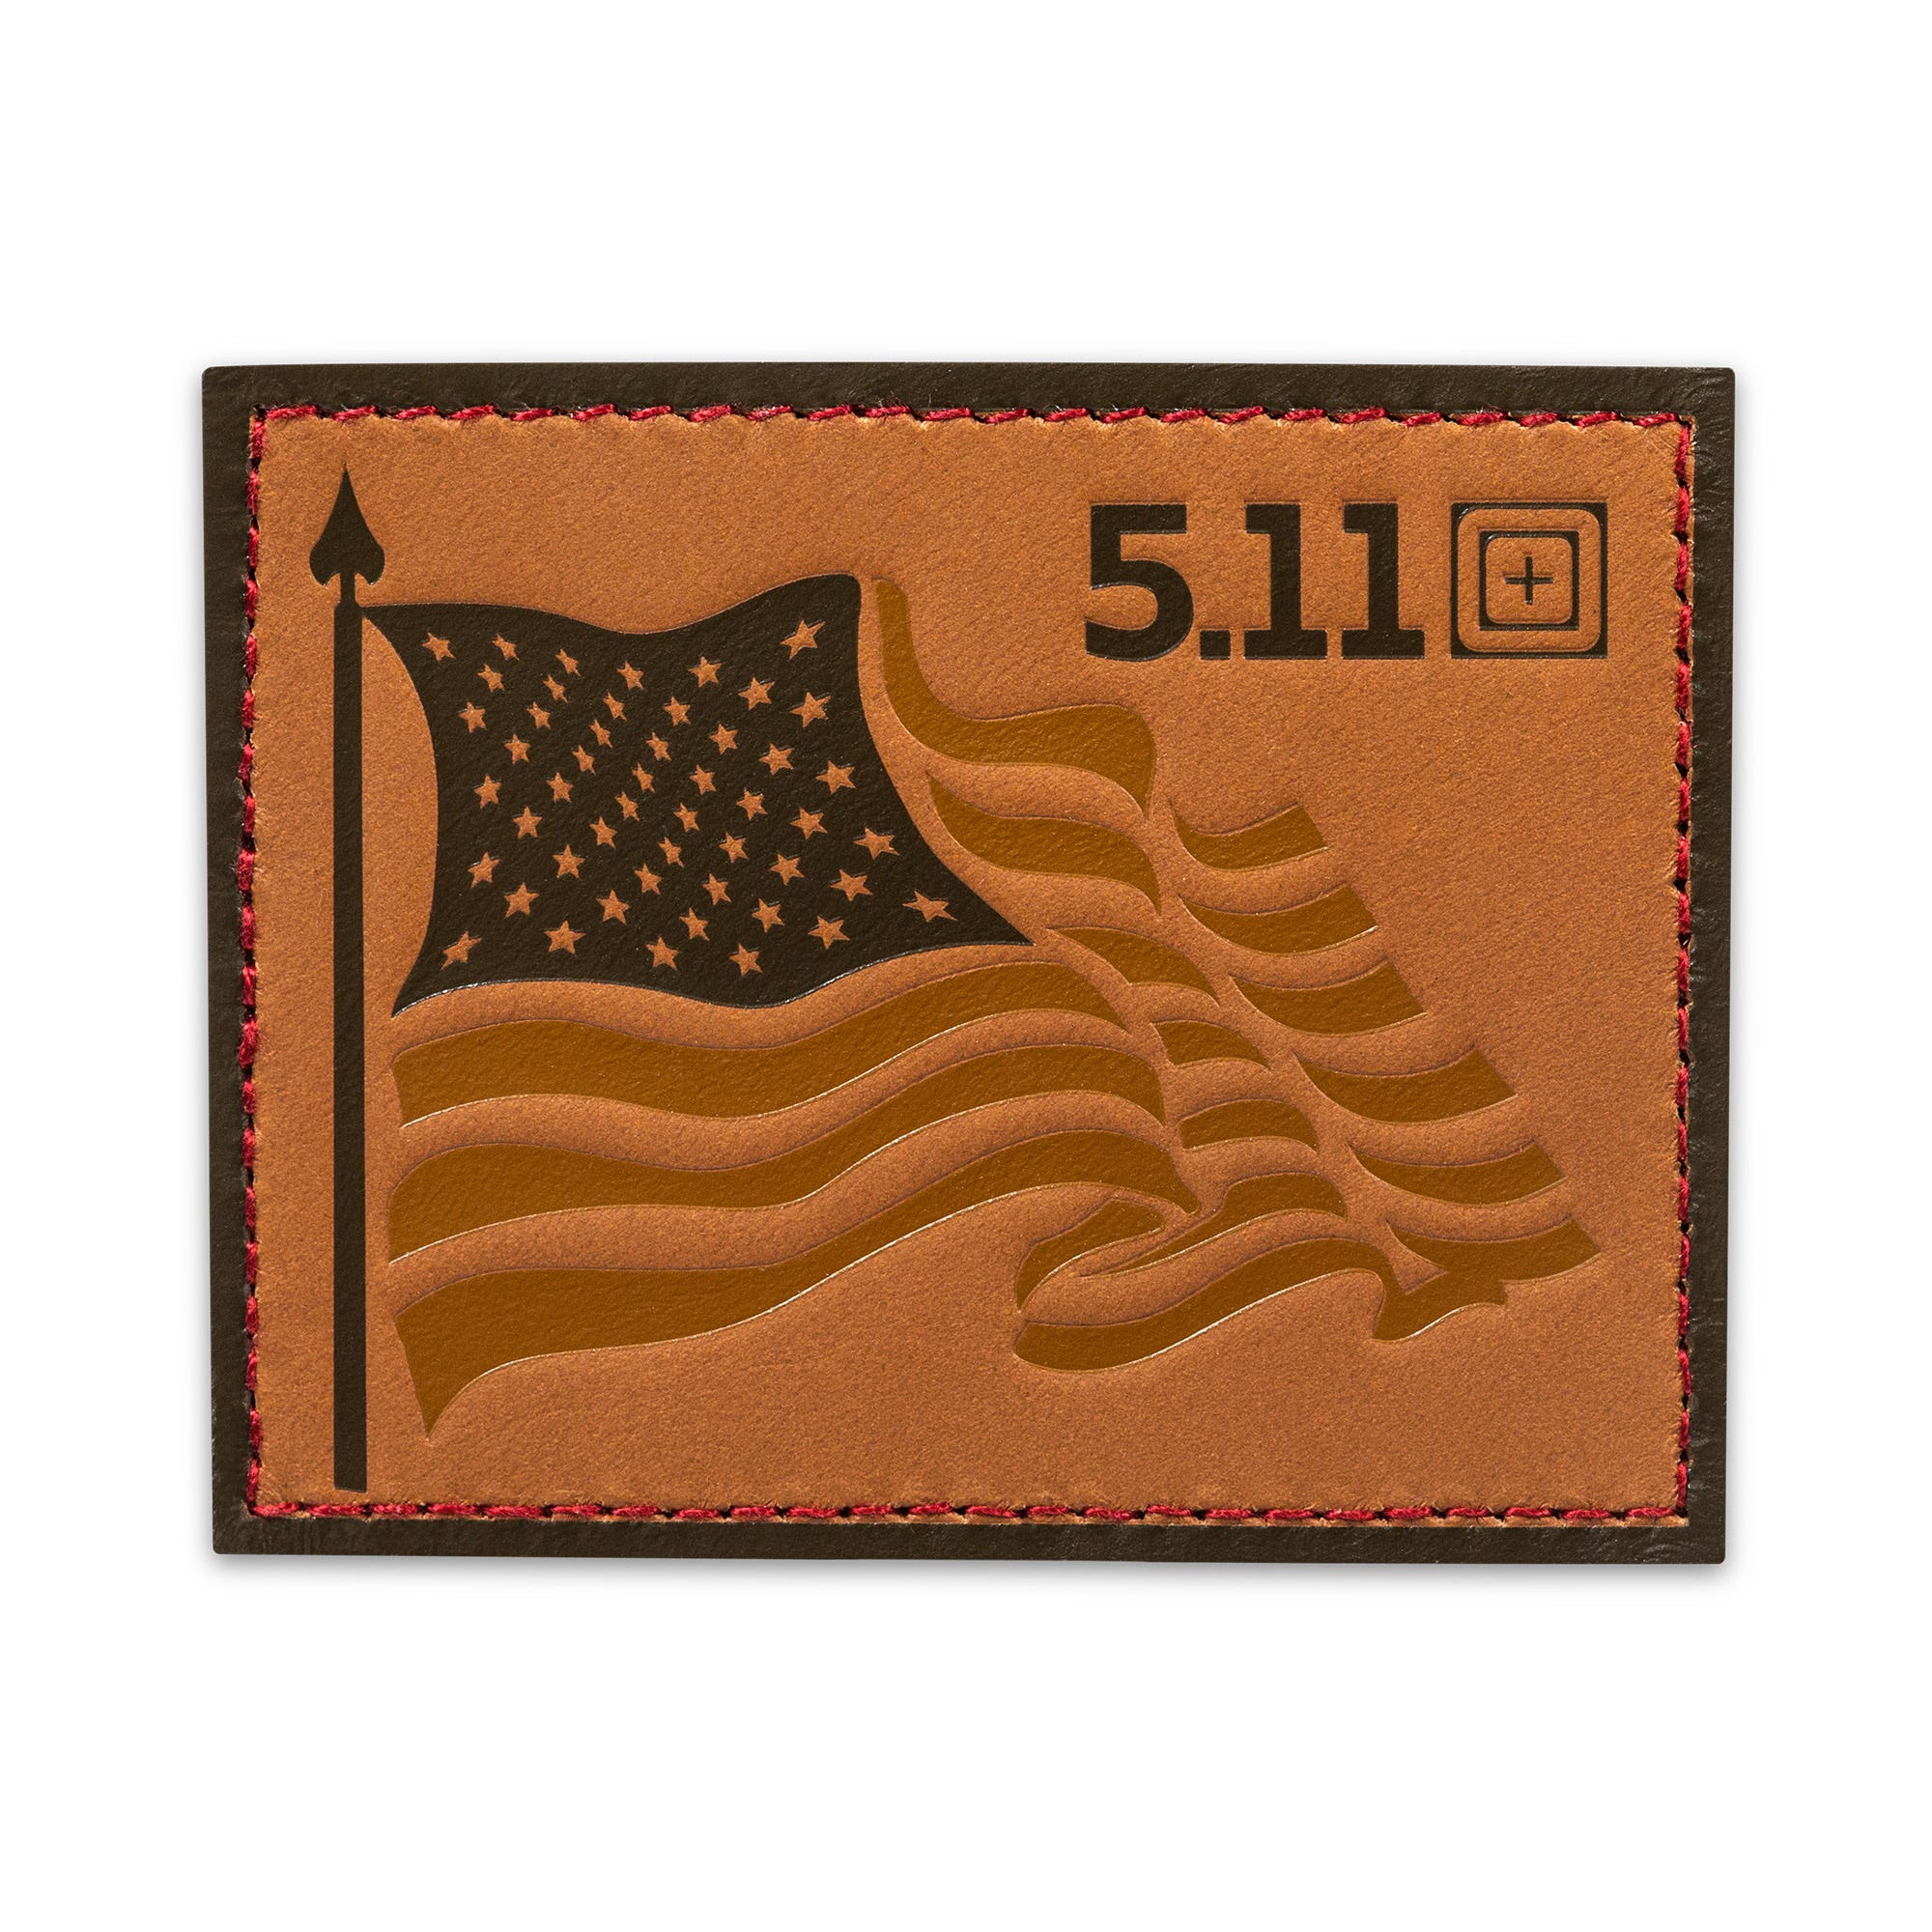 NEW 5.11 Tactical The Government Deleted My Photo Hook Back Morale Patch 81741 